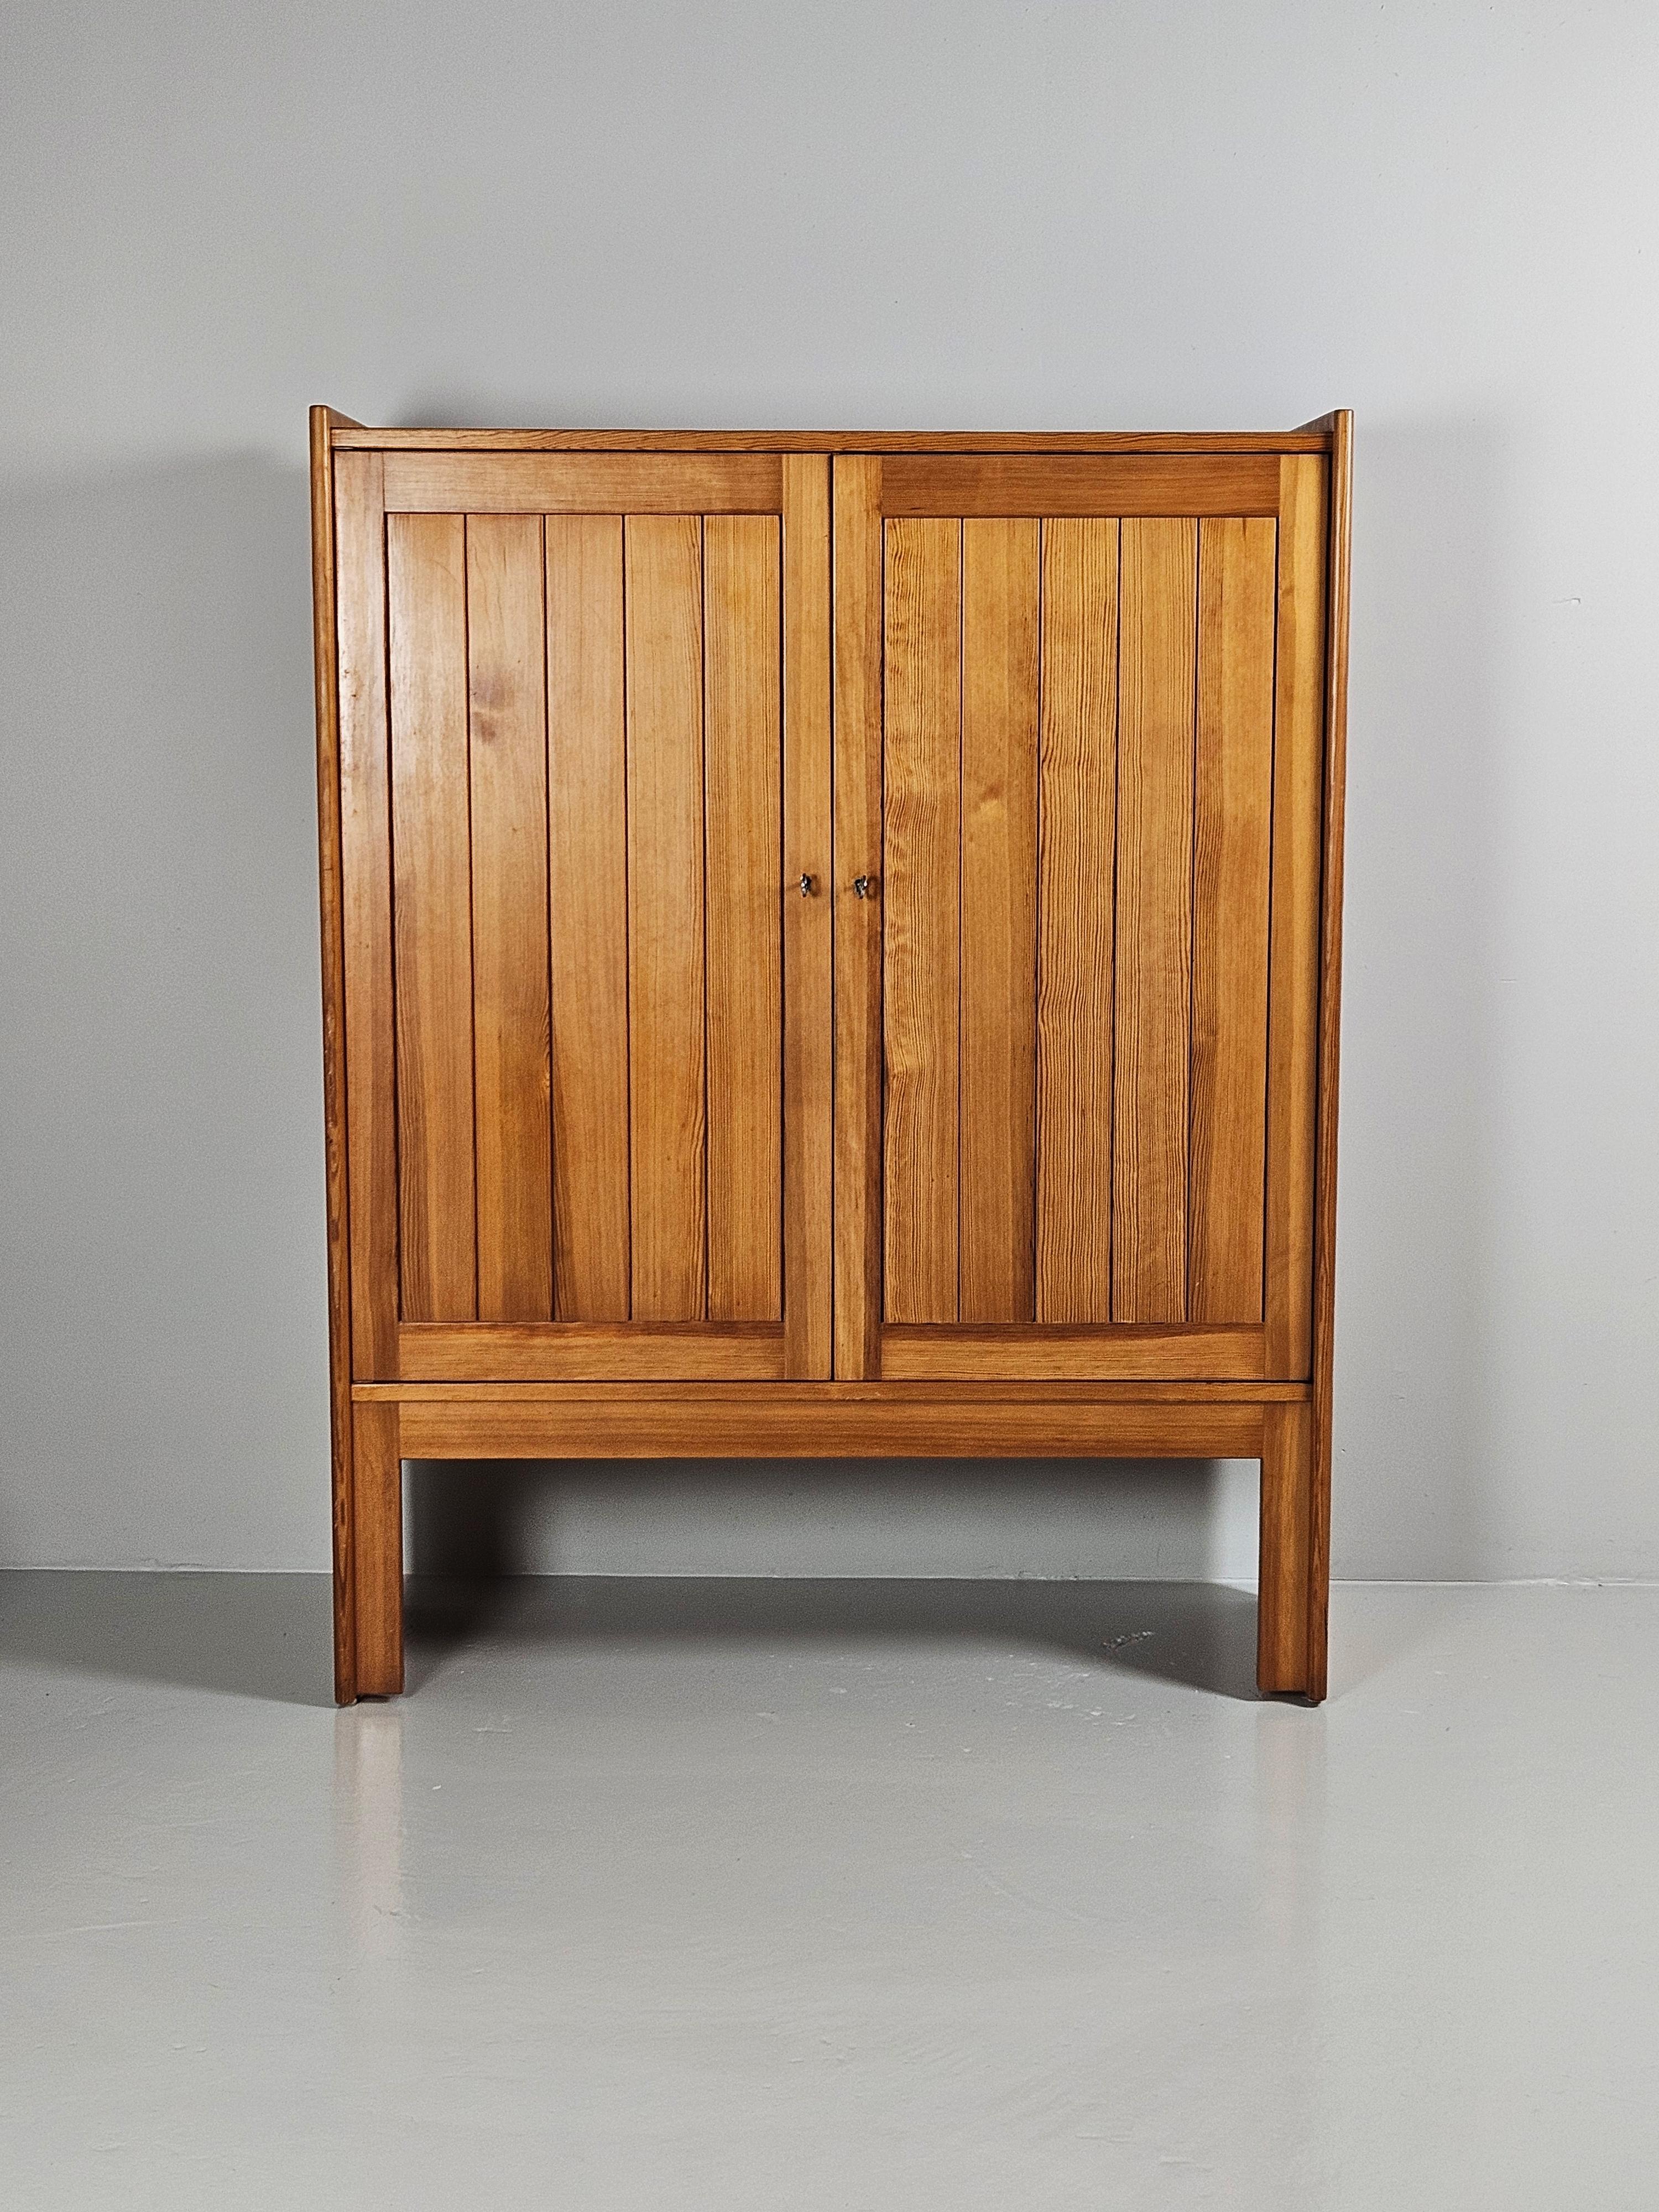 Very rare tall cabinet designed by Børge Mogensen in the 1960s.

In 1961 Mogensen designed pine furniture to be put in his own summer house. The series later started to be produced by the Swedish company Karl Andersson & söner and was named